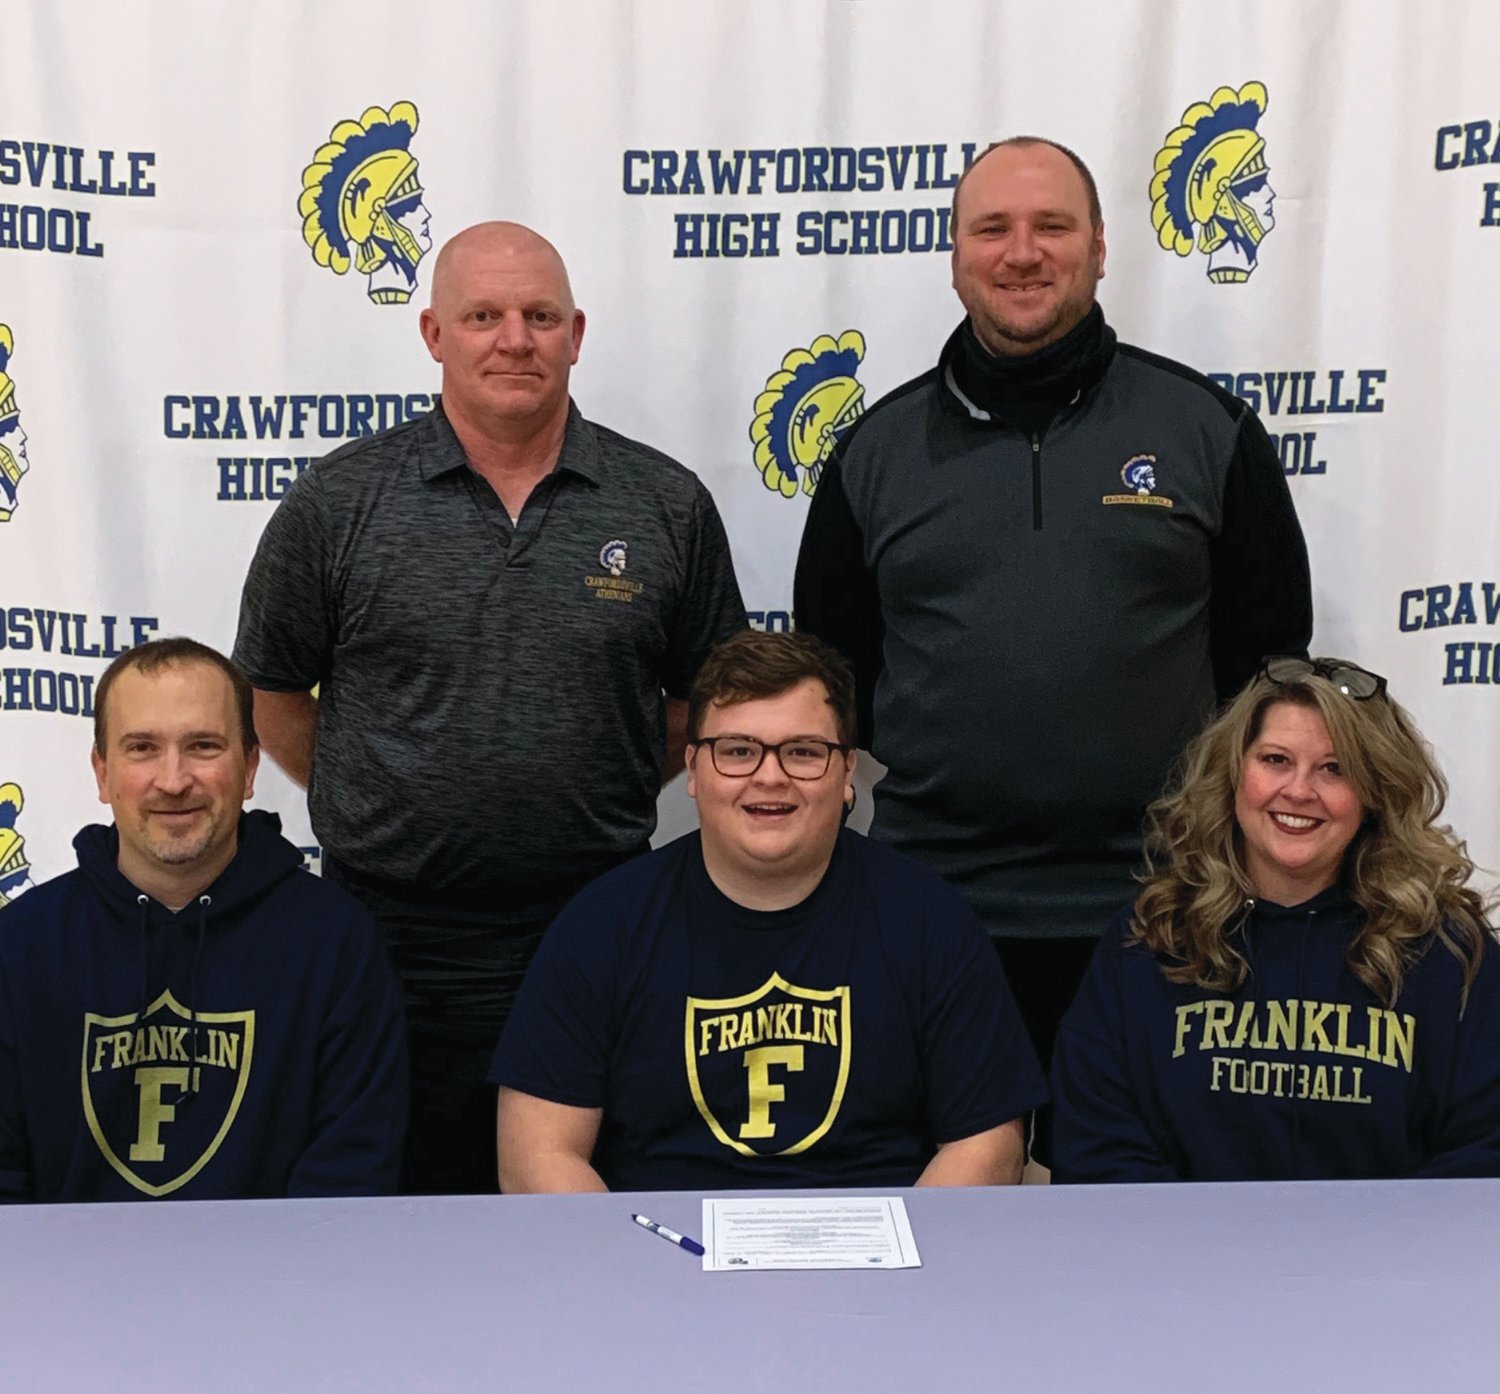 Crawfordsville senior football lineman Corbin Smith has committed to play at Franklin College. PICTURED: Corbin is joined by his parents, Scott and Michelle Smith, Crawfordsville head football coach Kurt Schlicher and assistant coach Sean Gerold.